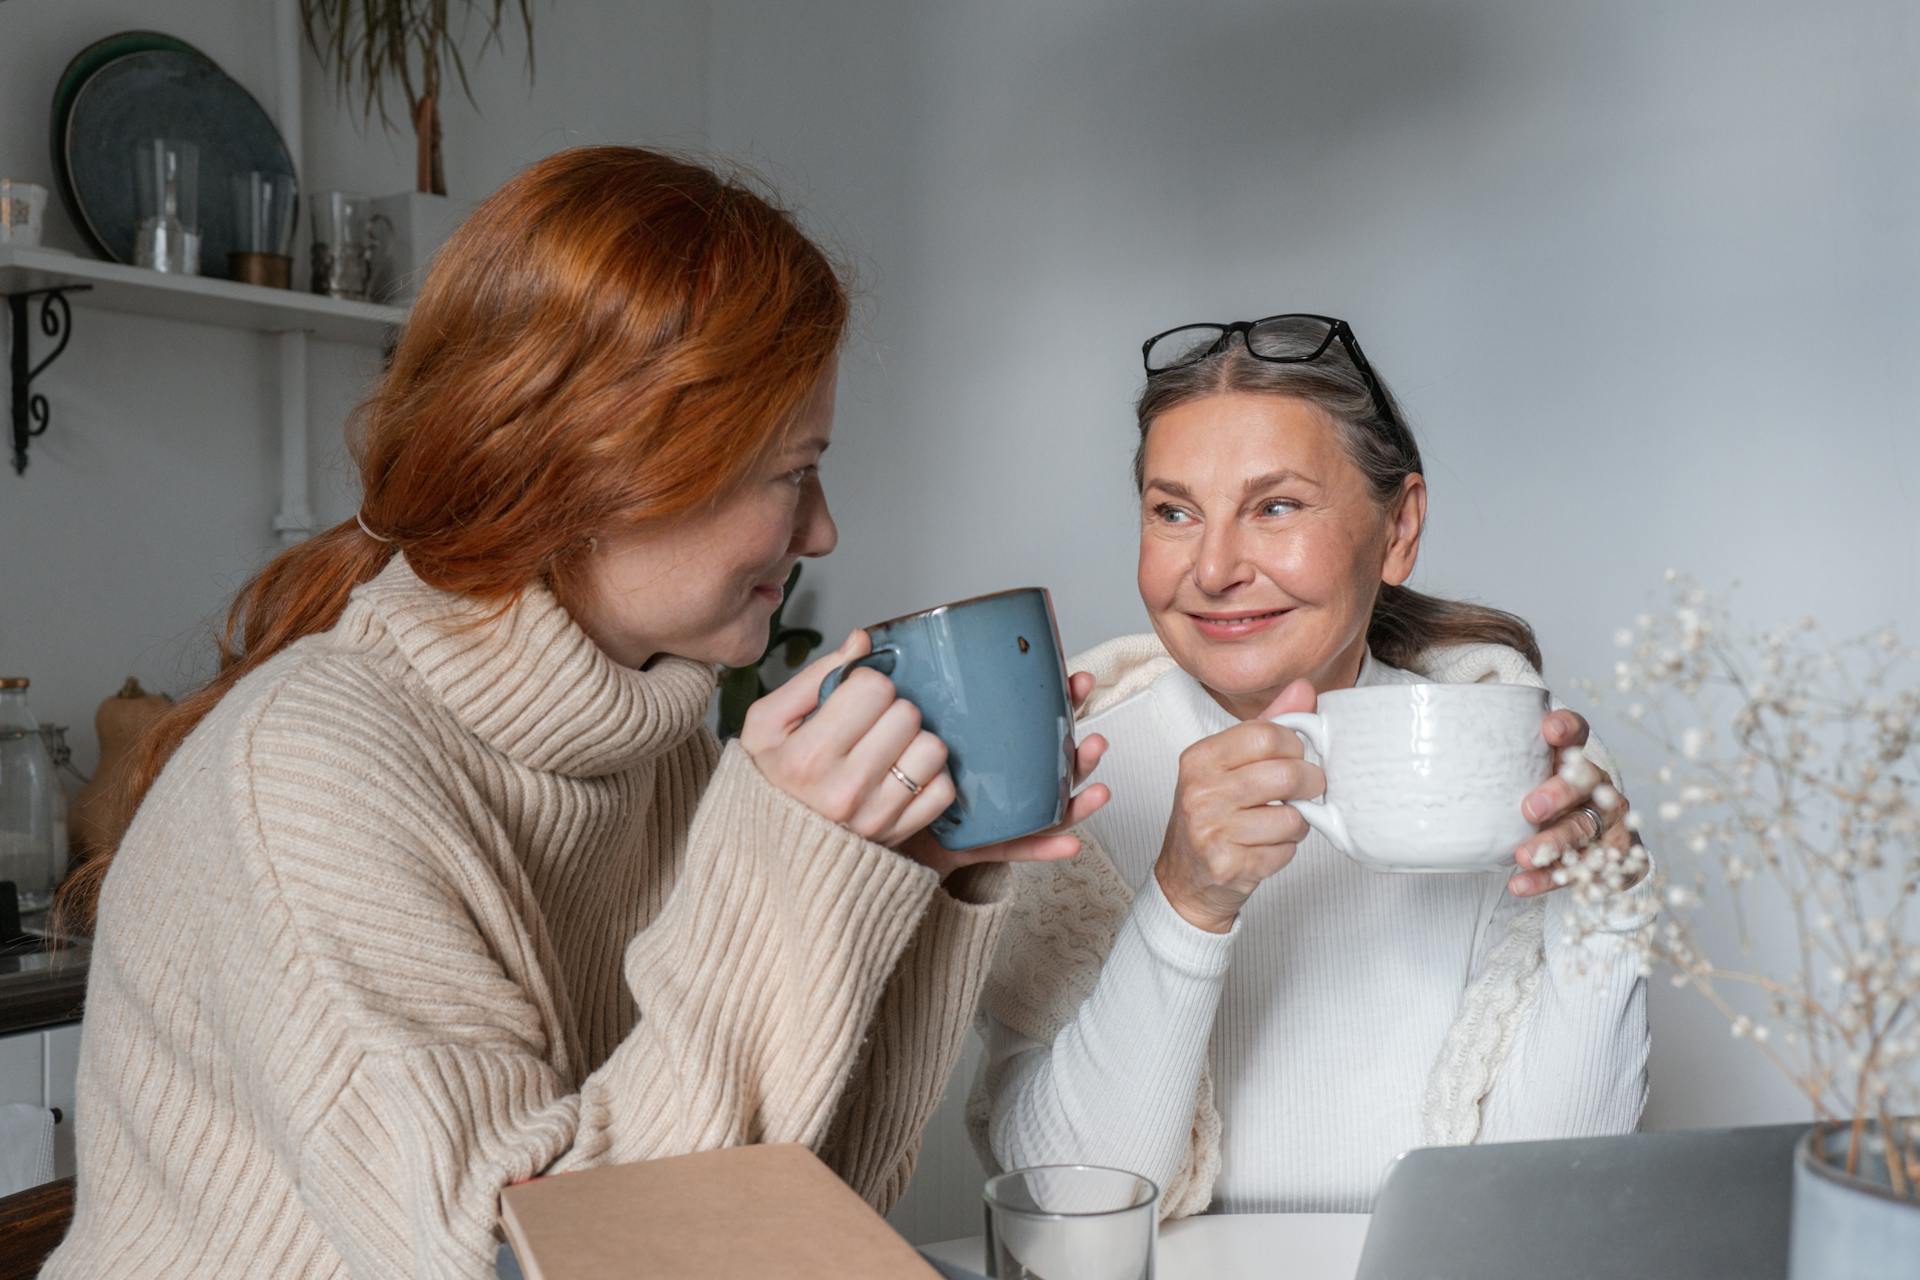 Two people smiling and drinking tea | Source: Pexels